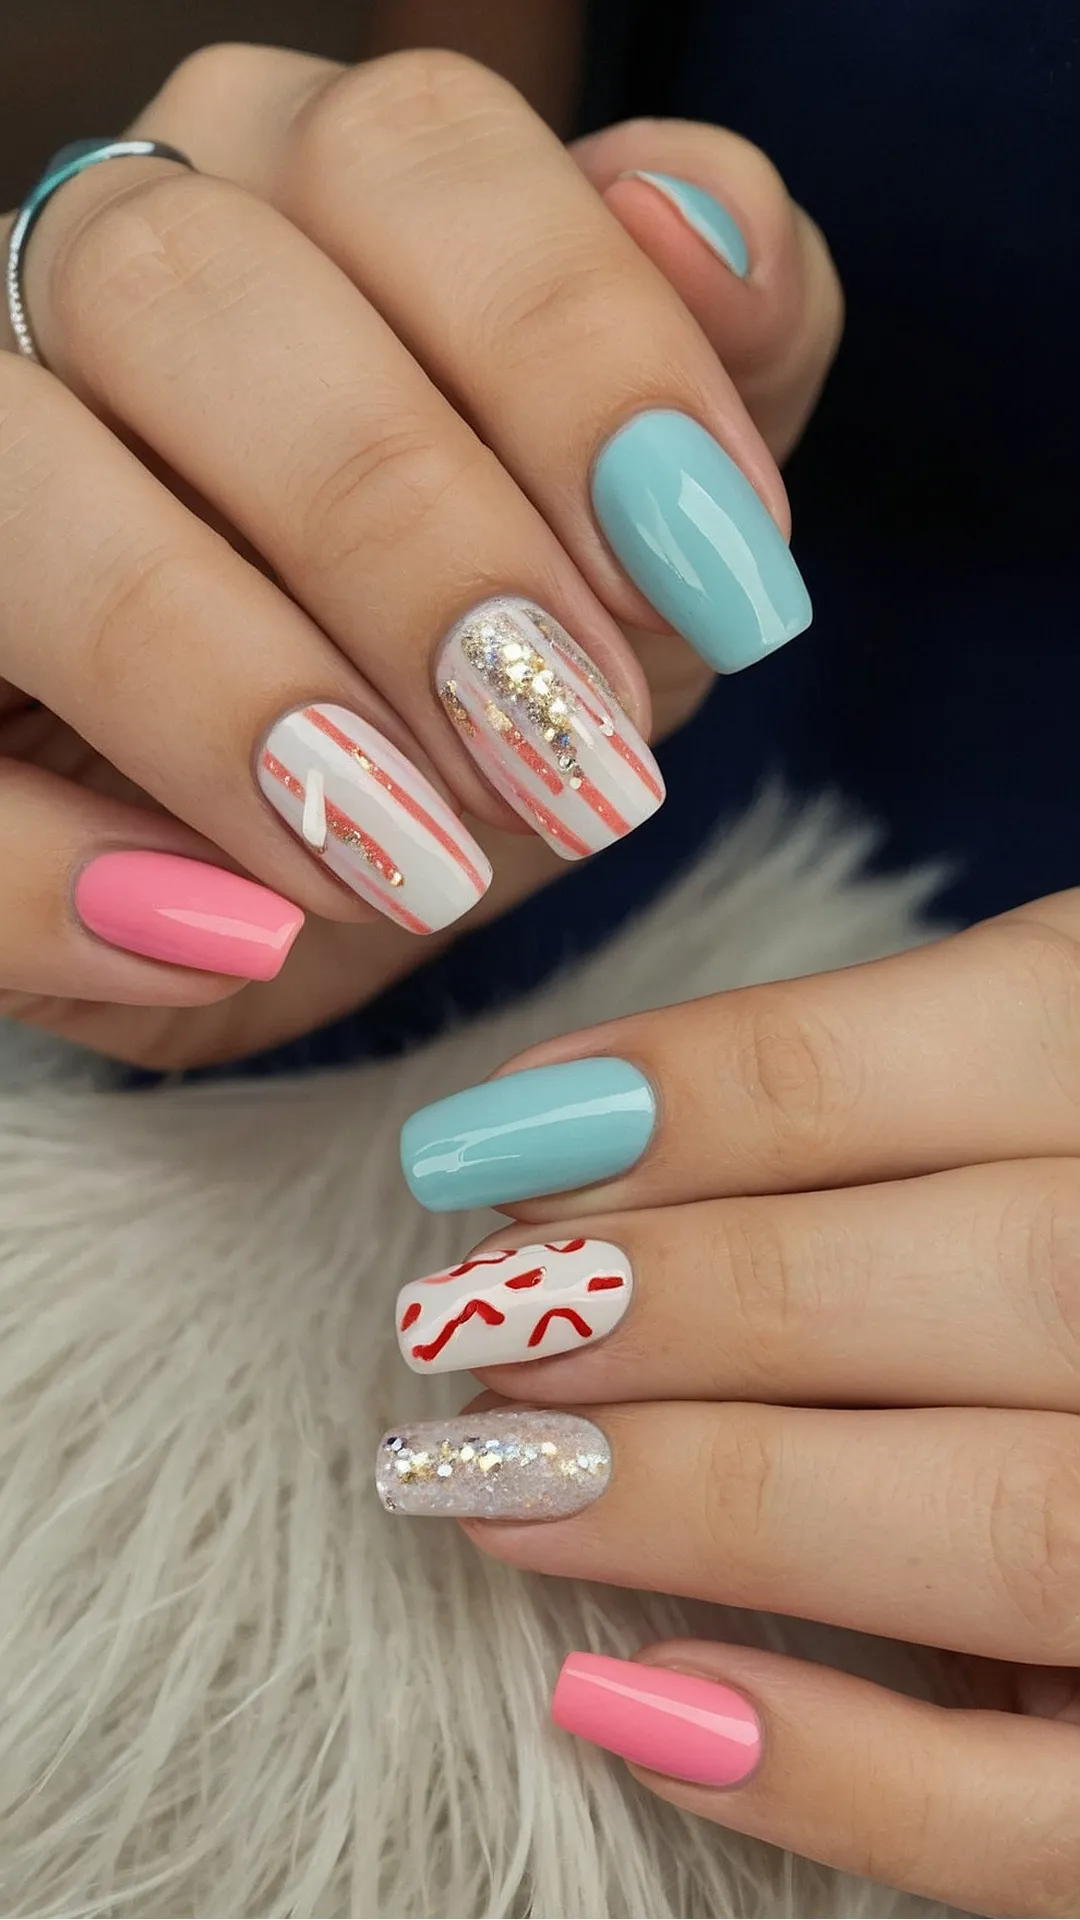 Land of the Free, Home of the Brave Nails: Creative July 4th Ideas